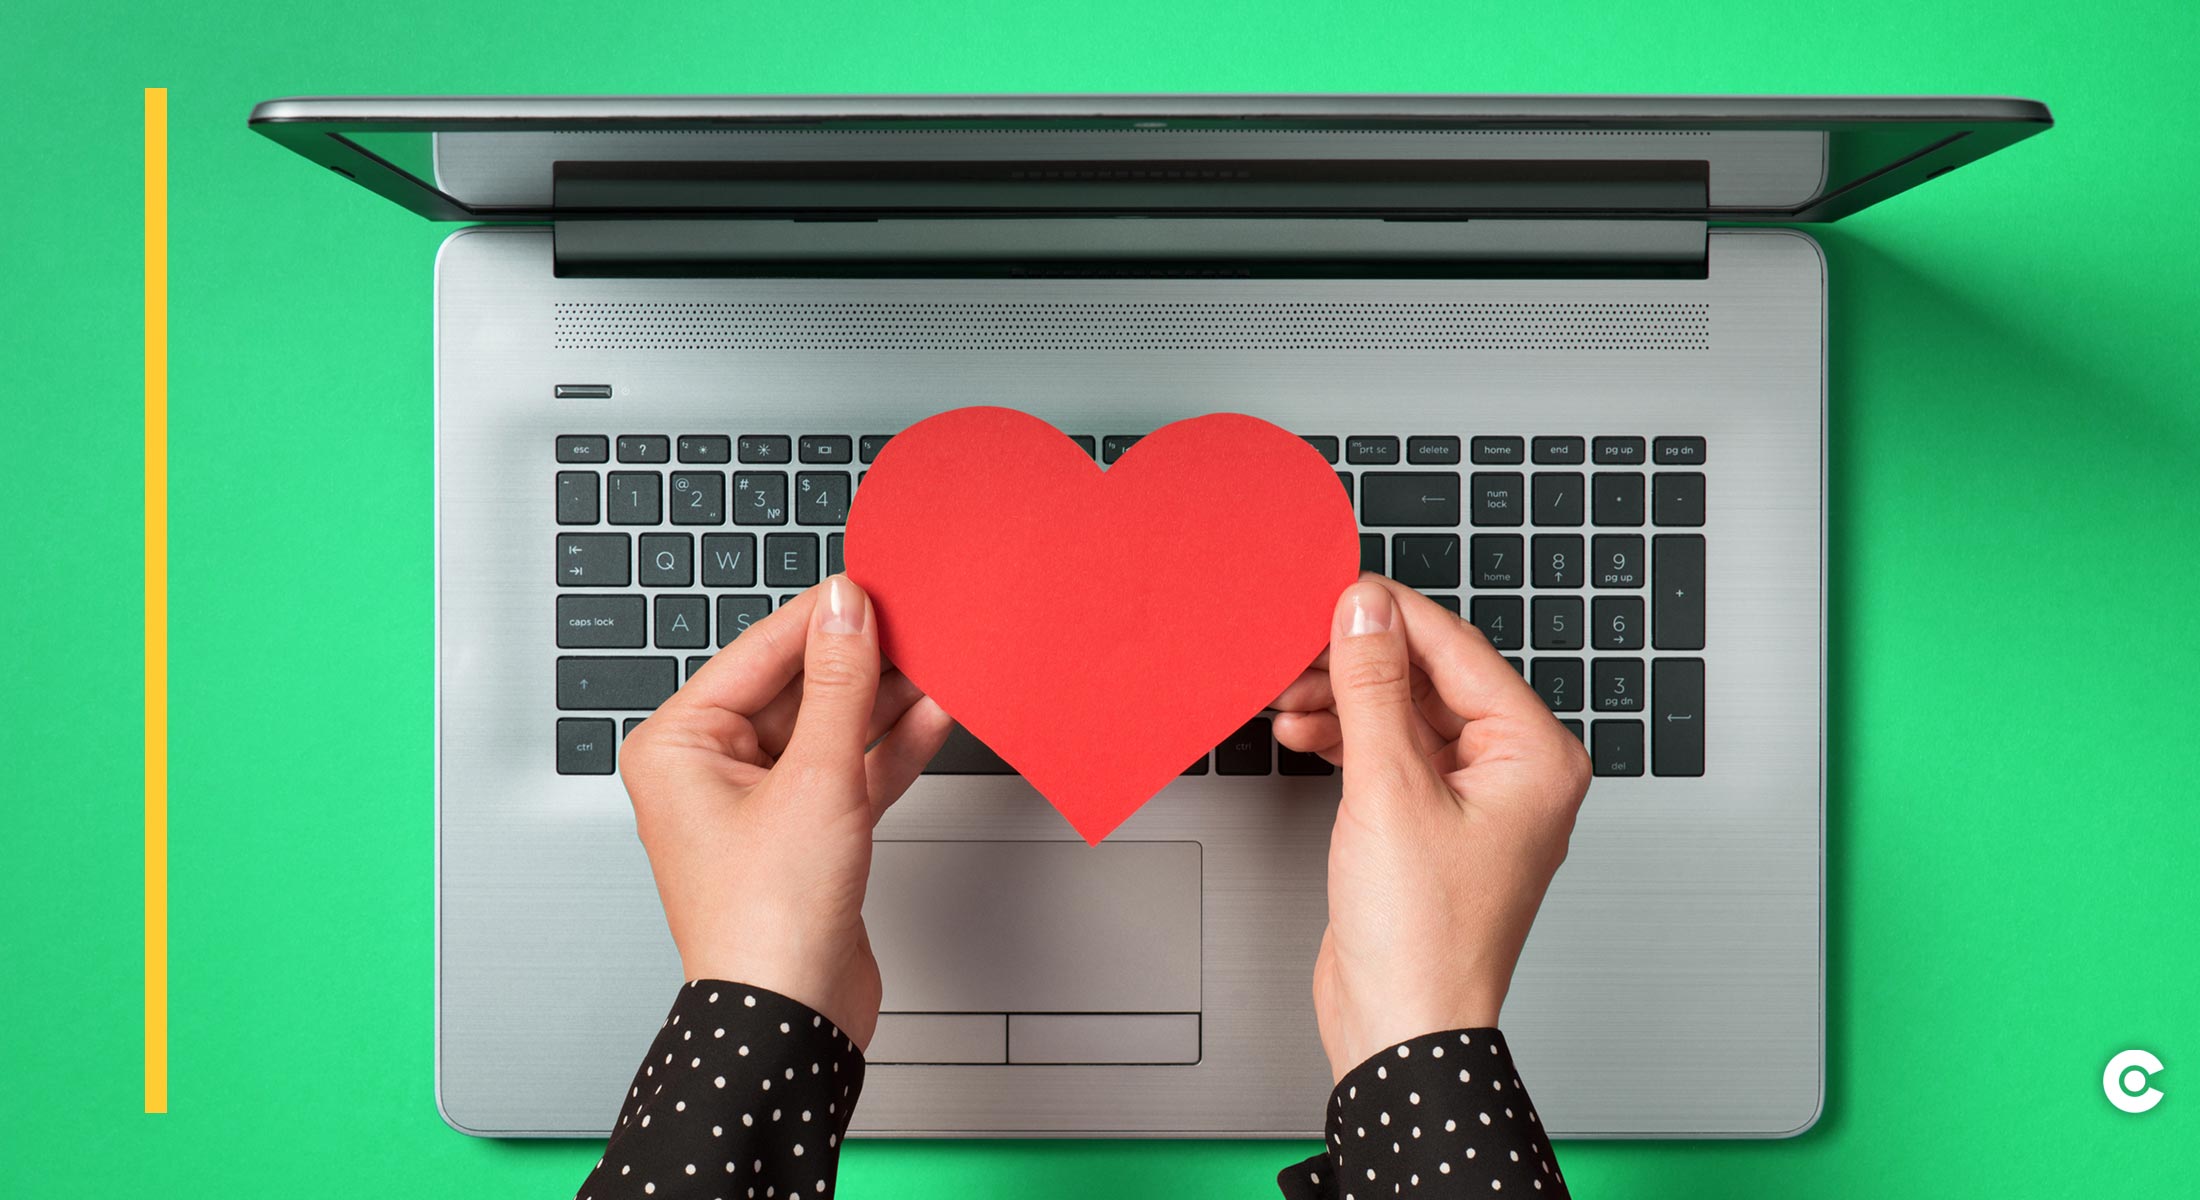 Two hands hold a cut-out of a red heart above a laptop keyboard